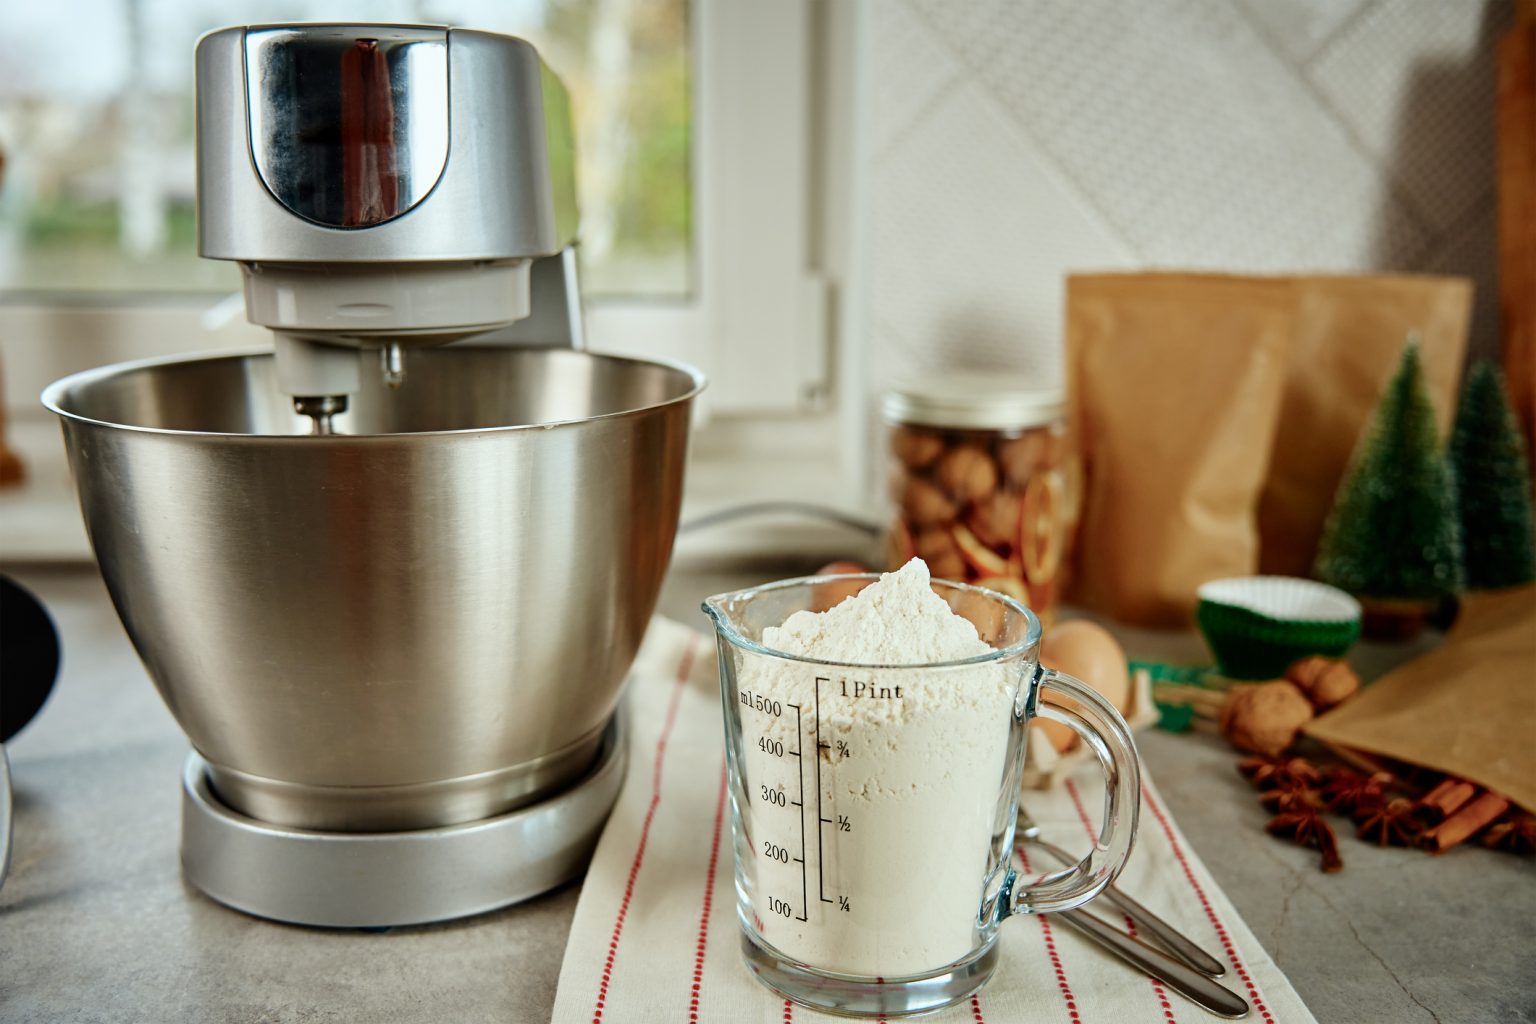 Preparation of dough in an electric mixer at home. Professional mixer for kneading dough and food ingredients in kitchen interior. Modern appliances in the kitchen